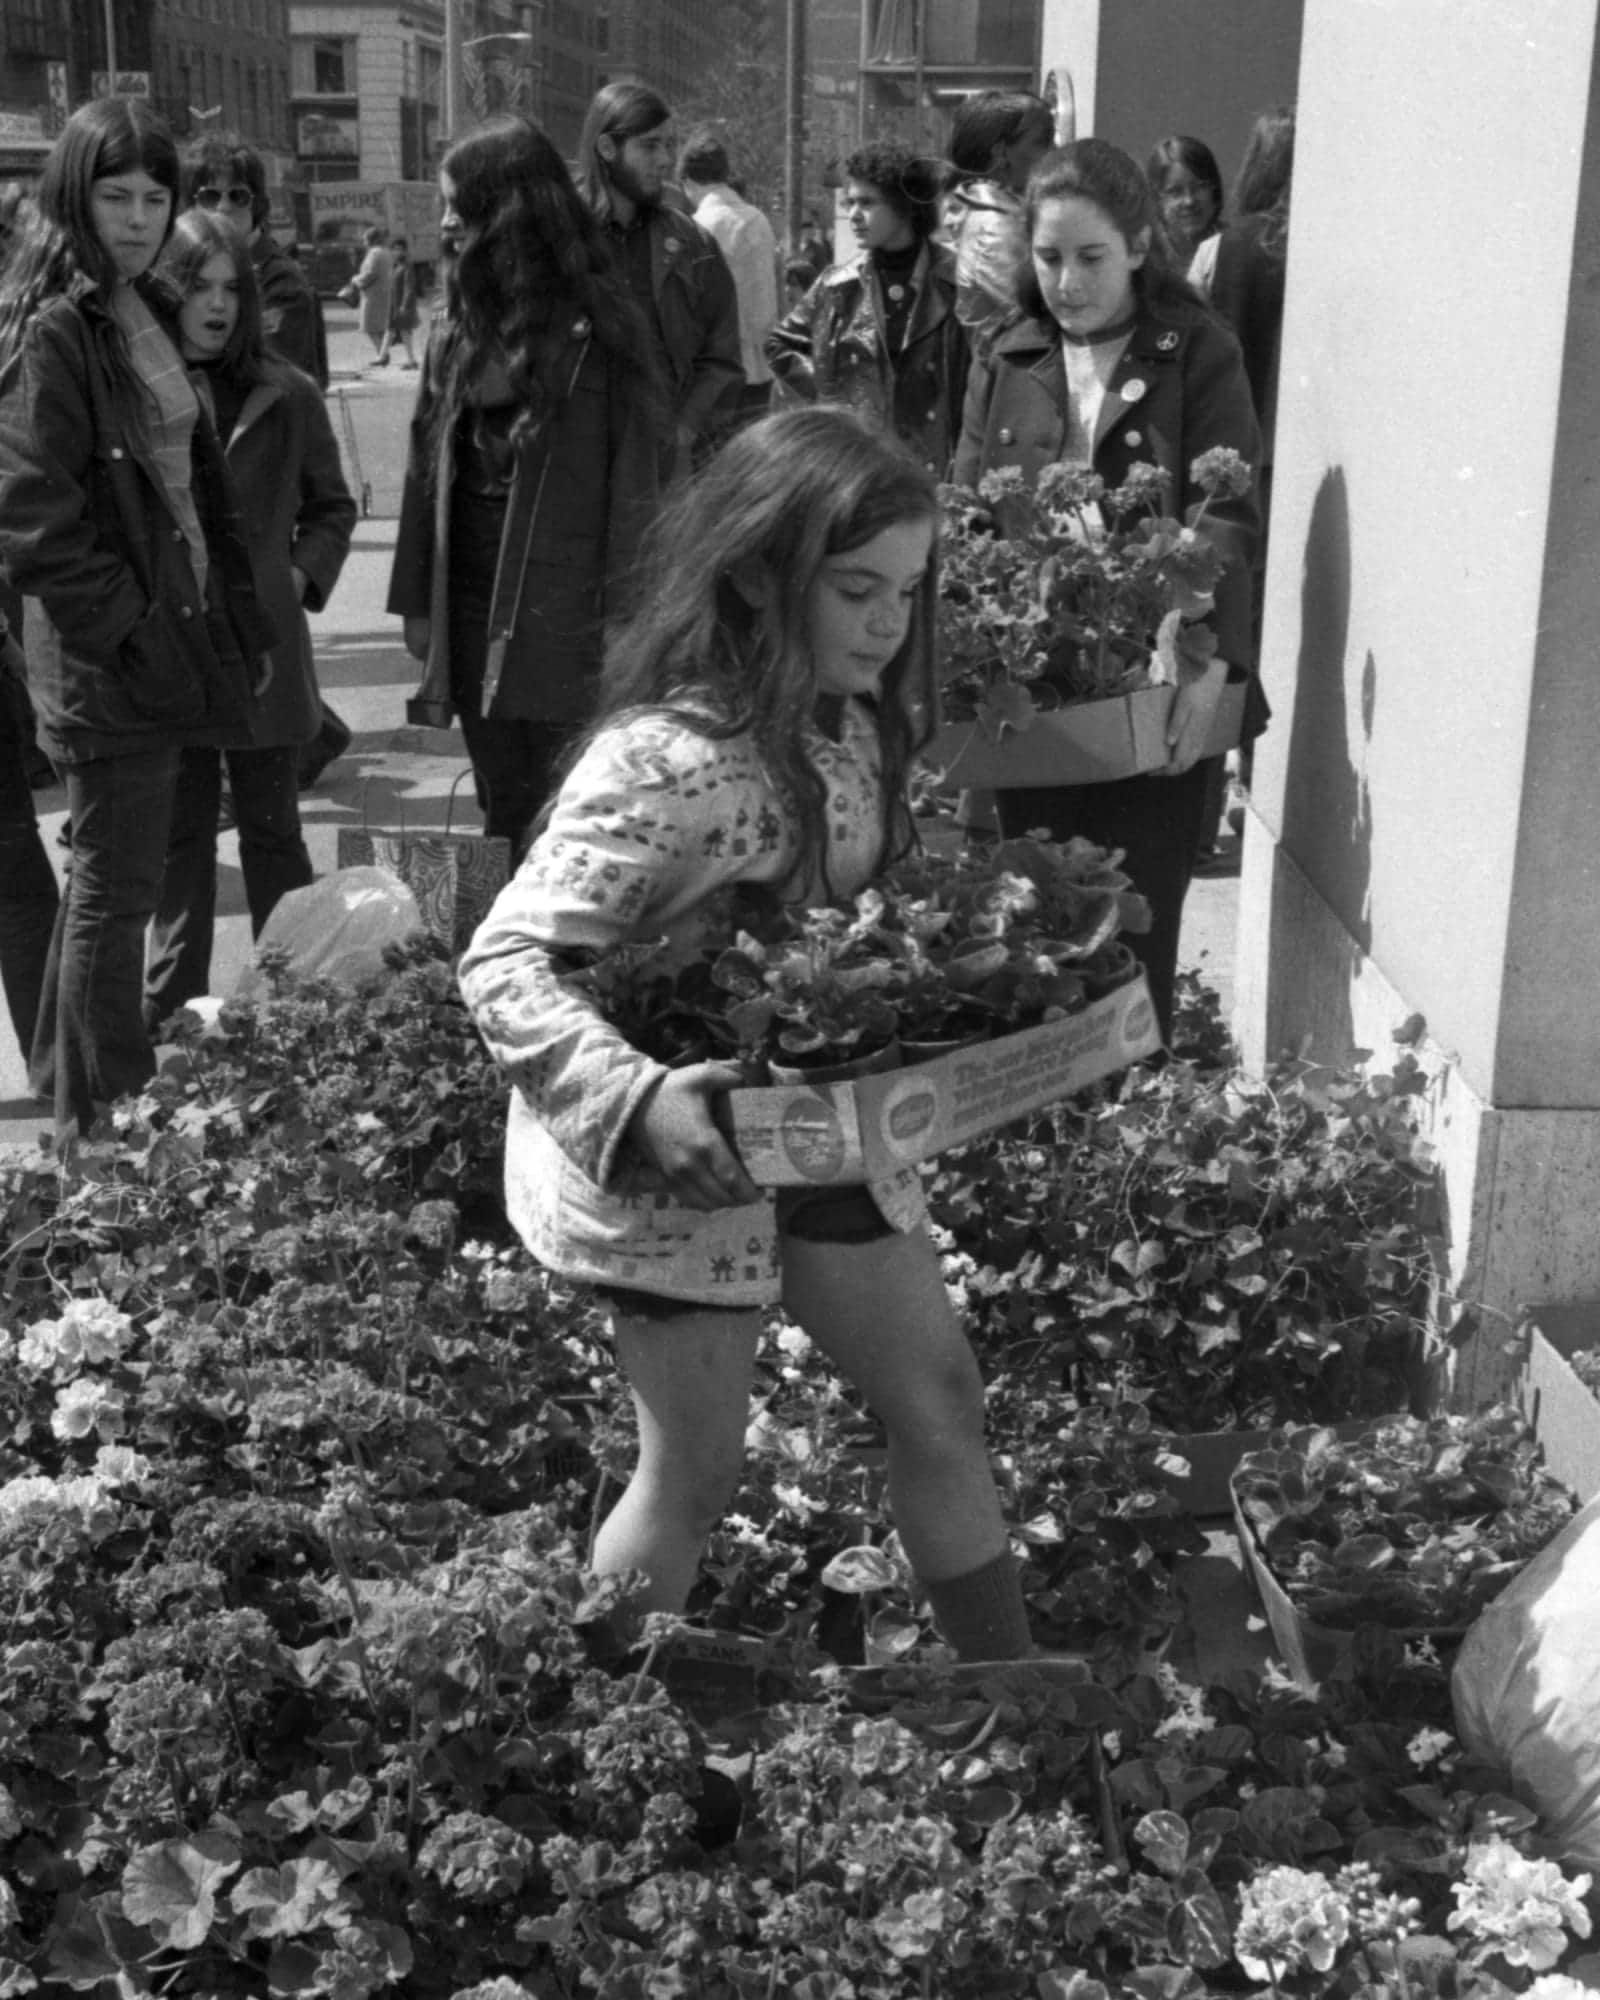 In NYC's Union Square, girls planting flowers, April 22, 1970 for Earth Day